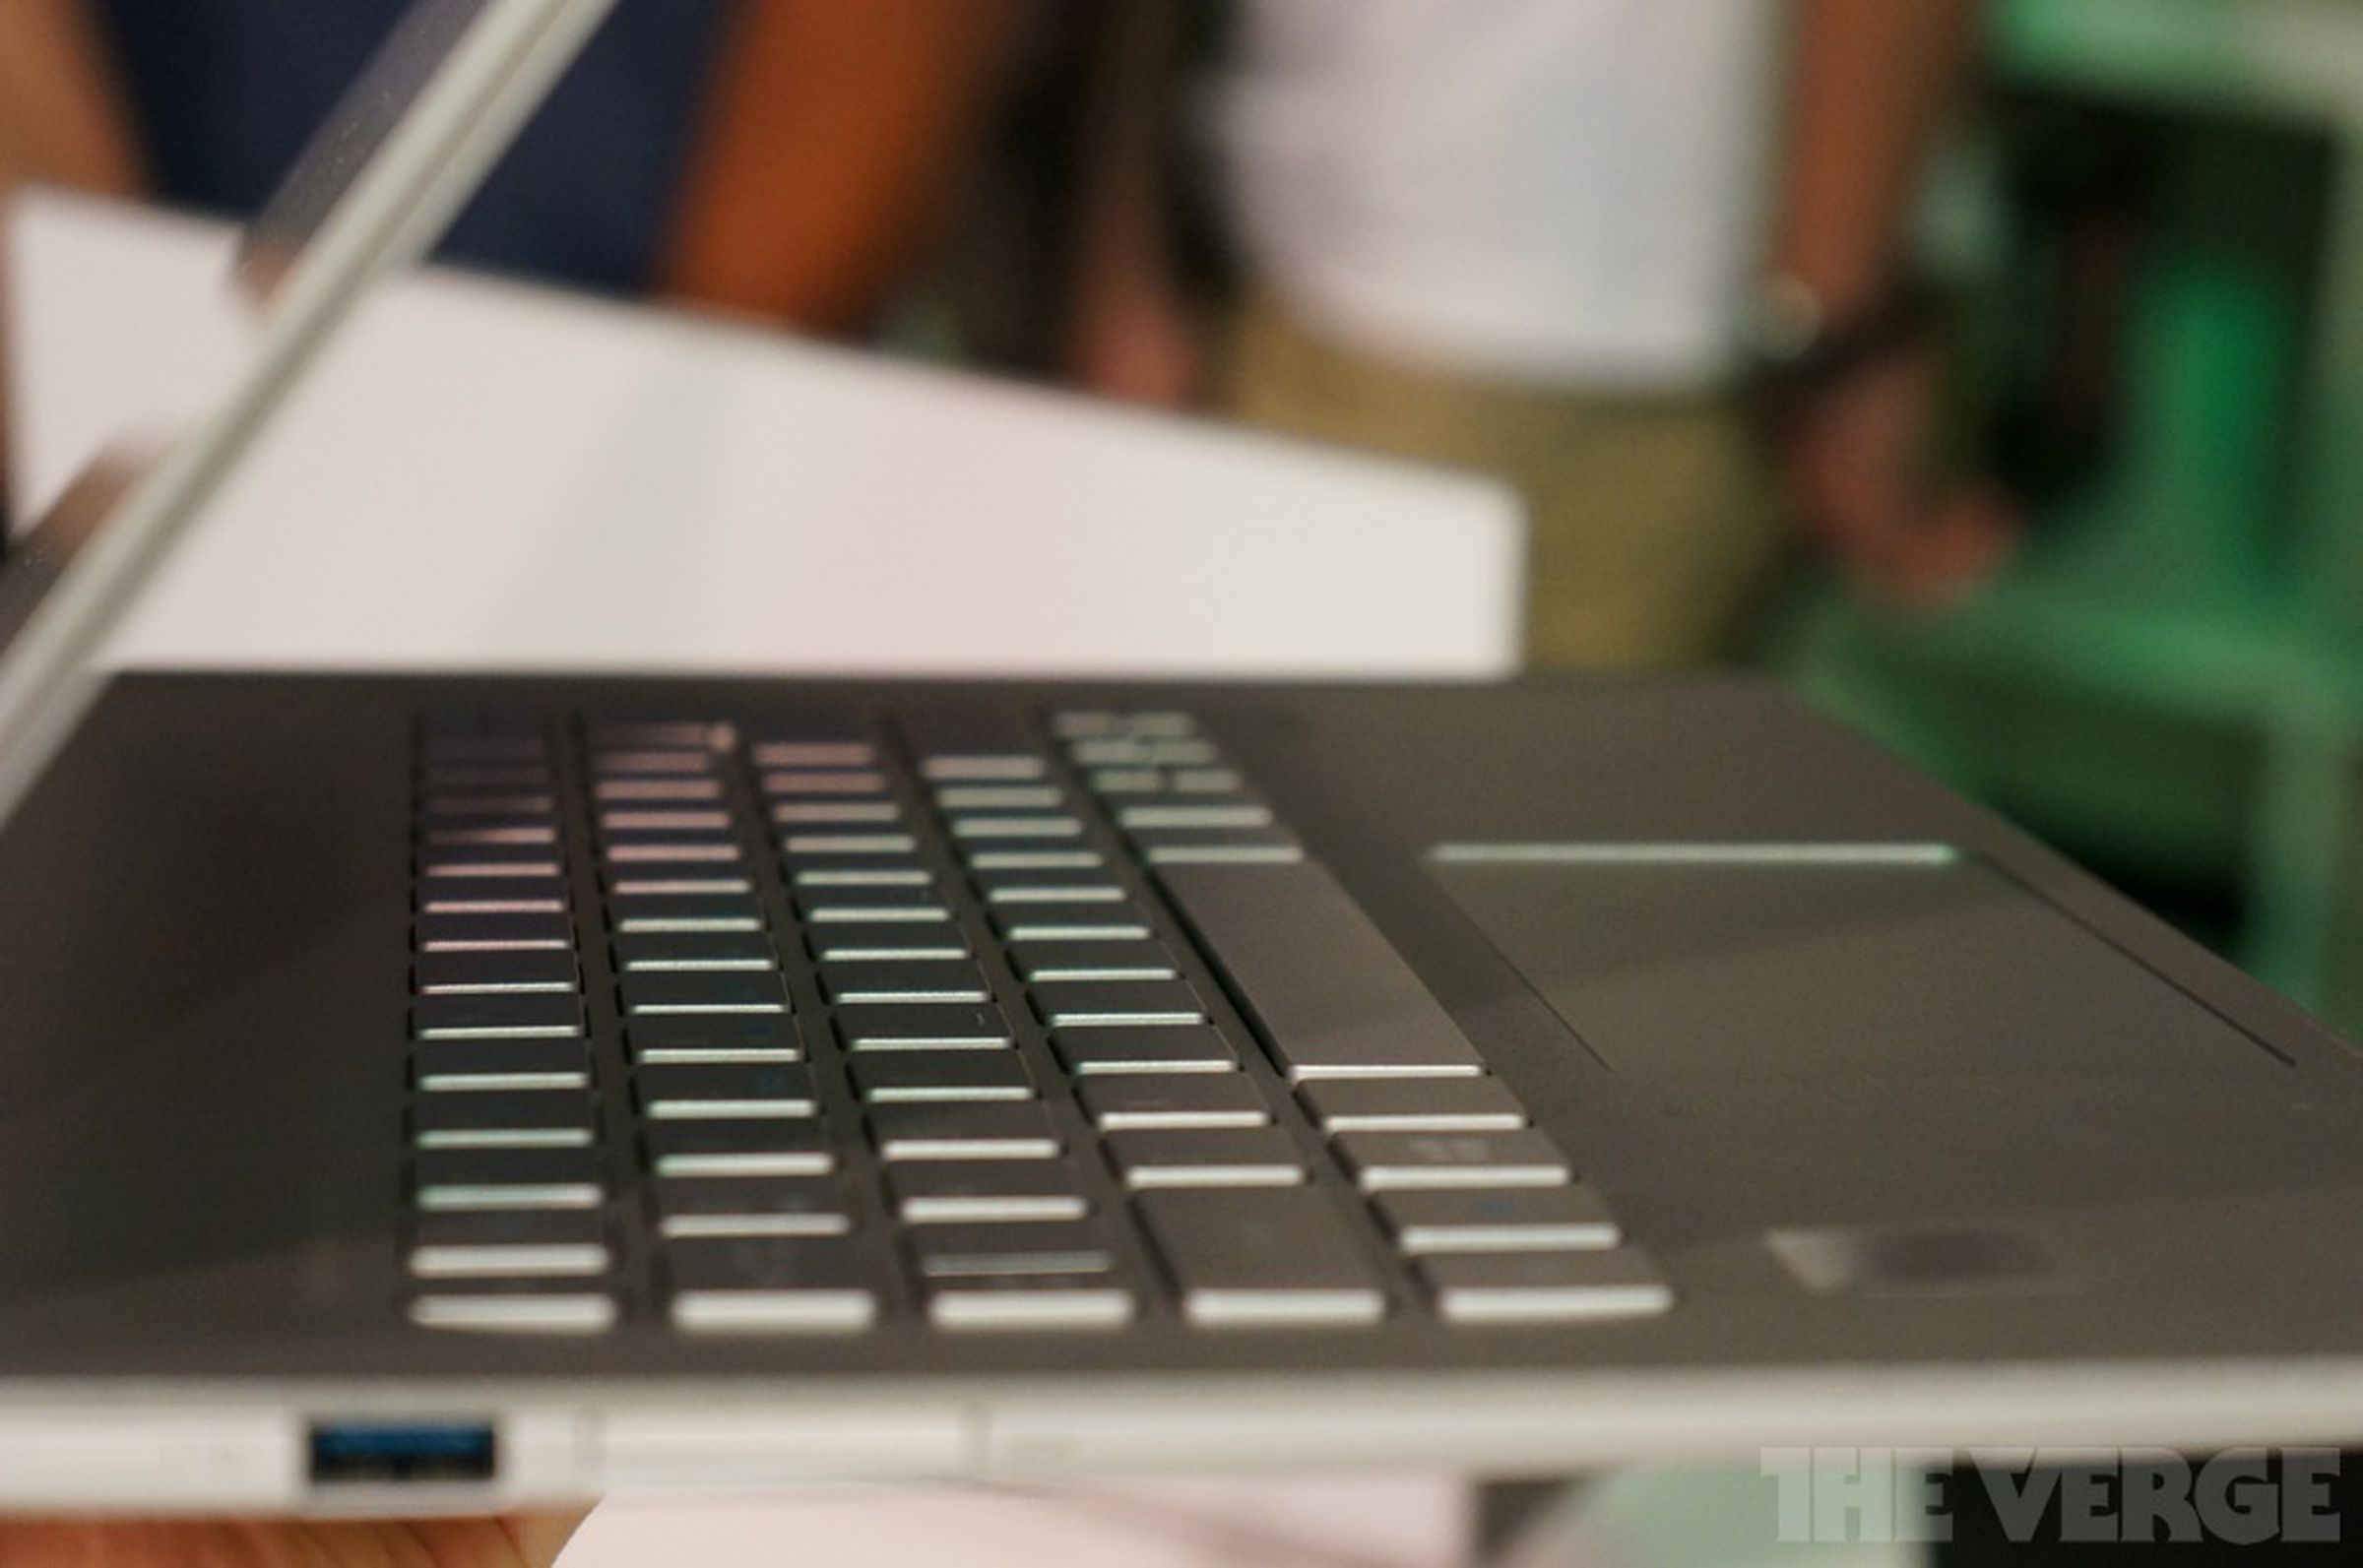 Acer Aspire S7 hands-on pictures